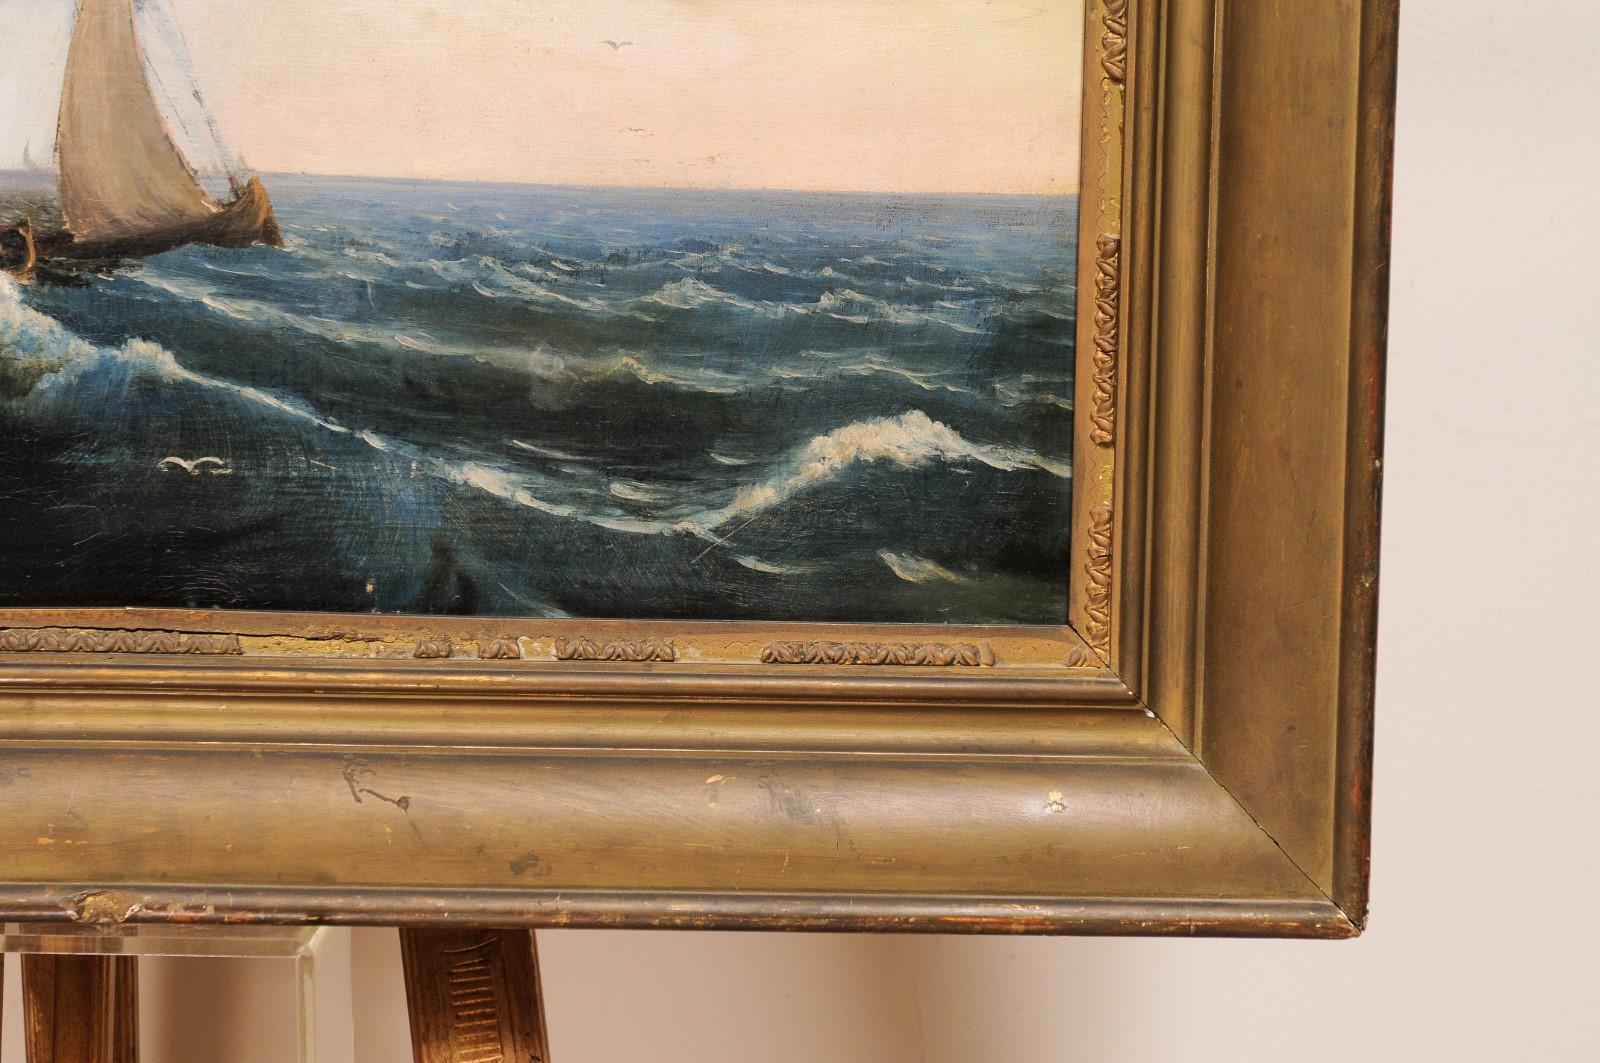 Giltwood Framed 19th Century Italian Oil on Canvas Seascape Painting For Sale 4